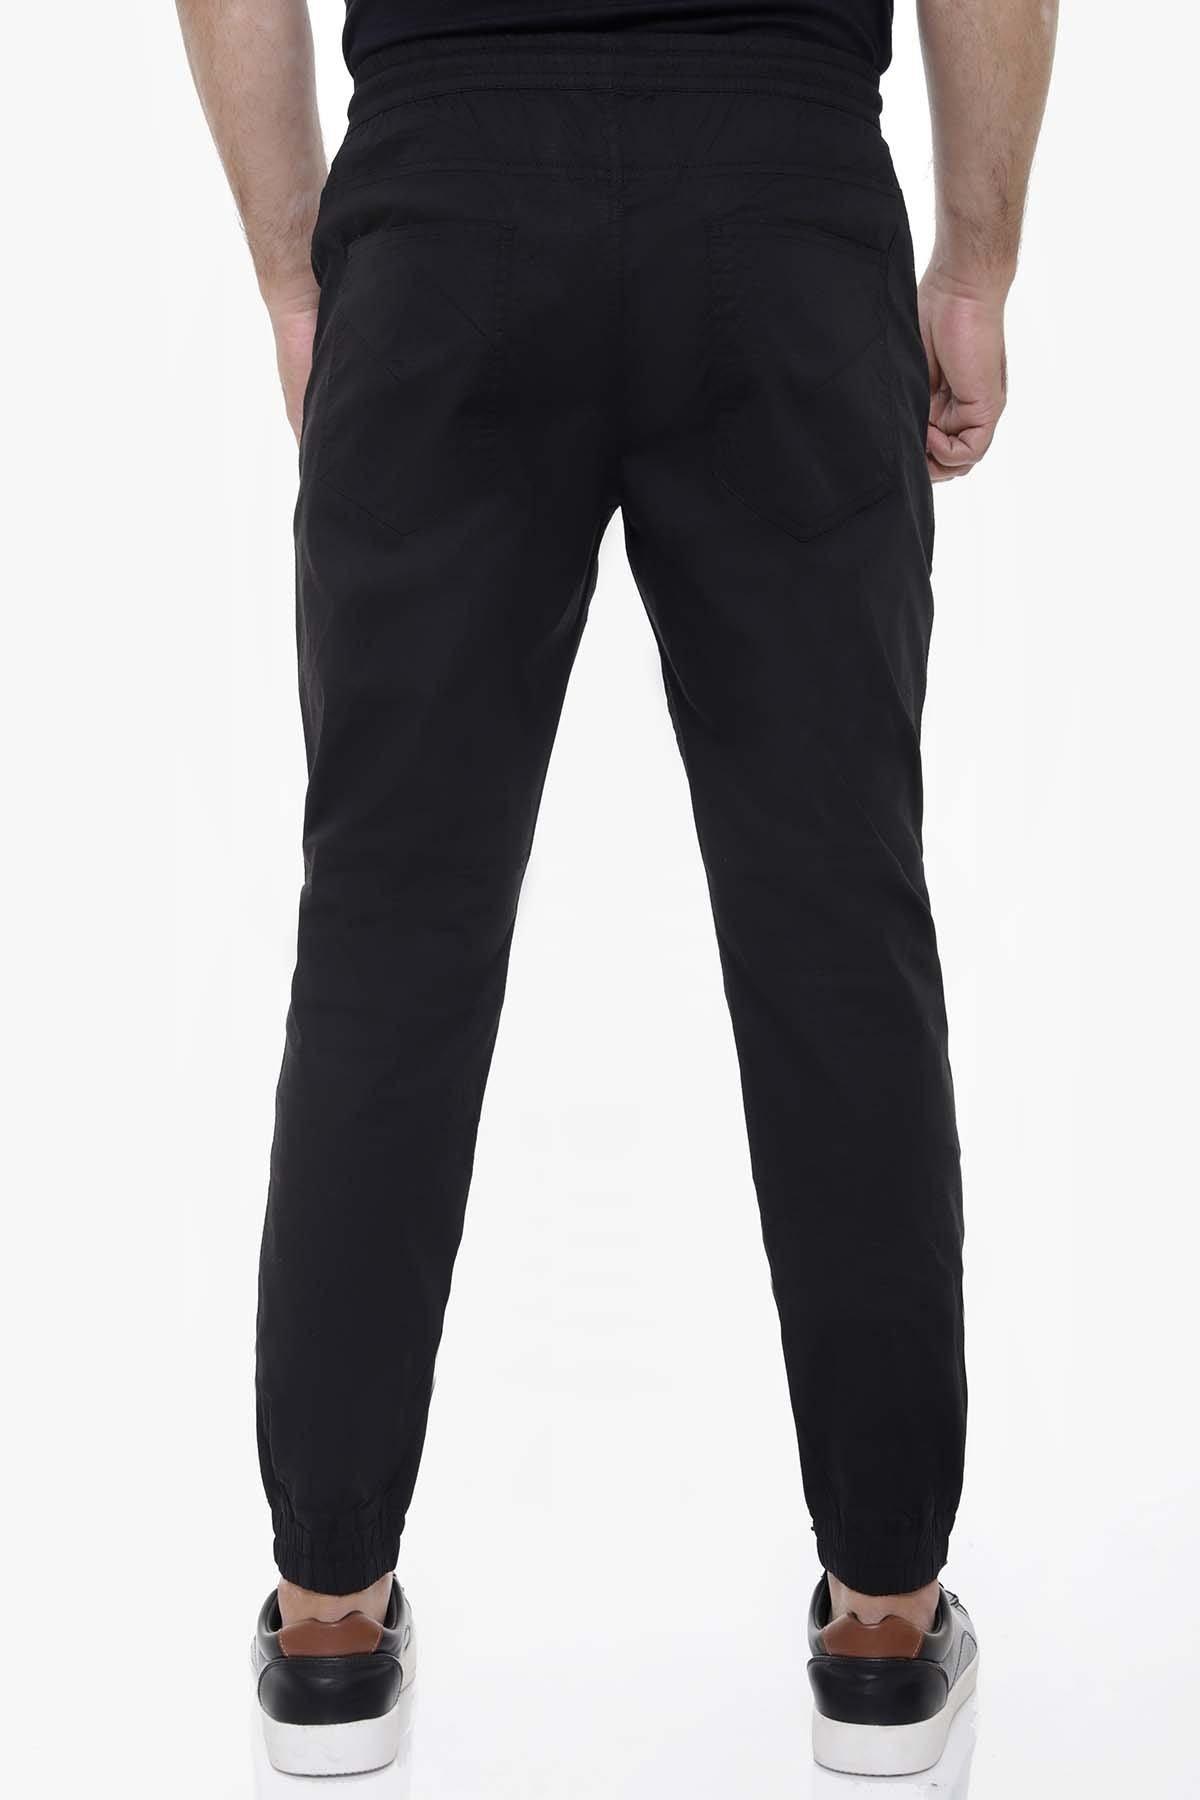 CASUAL TROUSER BLACK at Charcoal Clothing